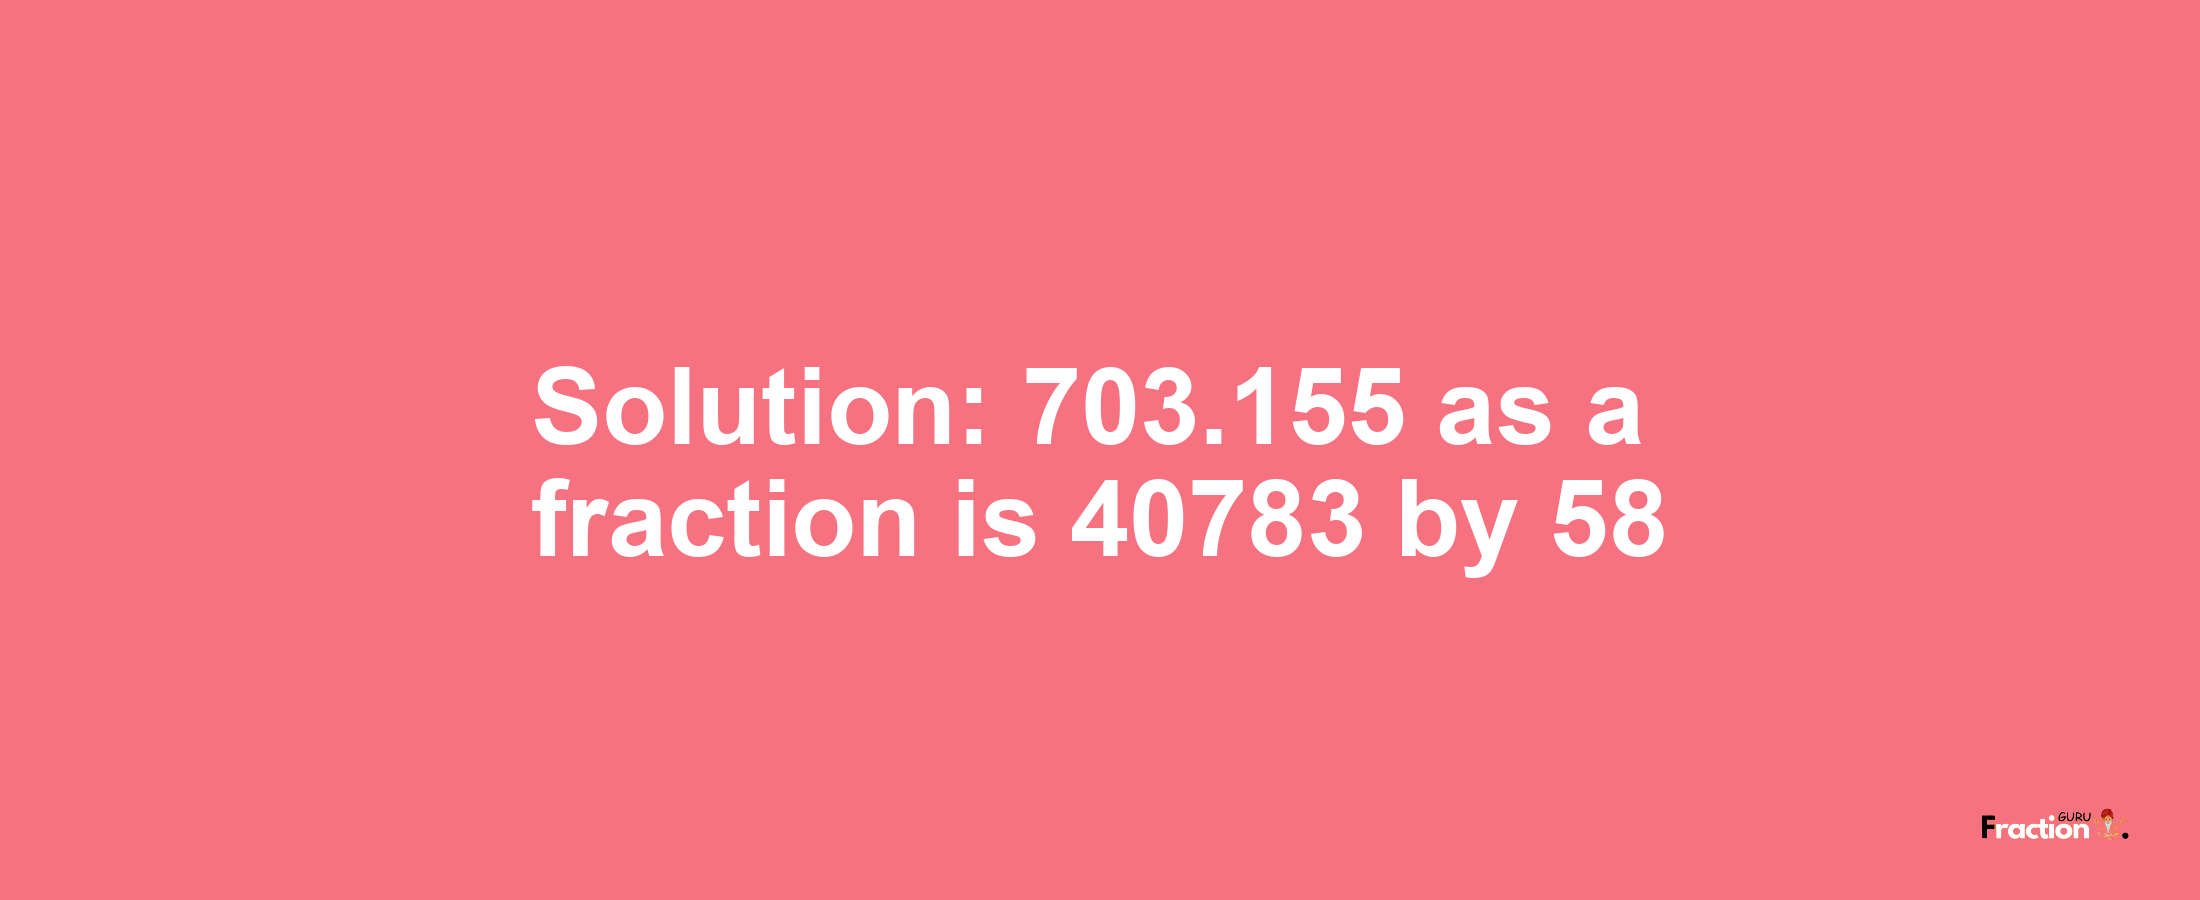 Solution:703.155 as a fraction is 40783/58